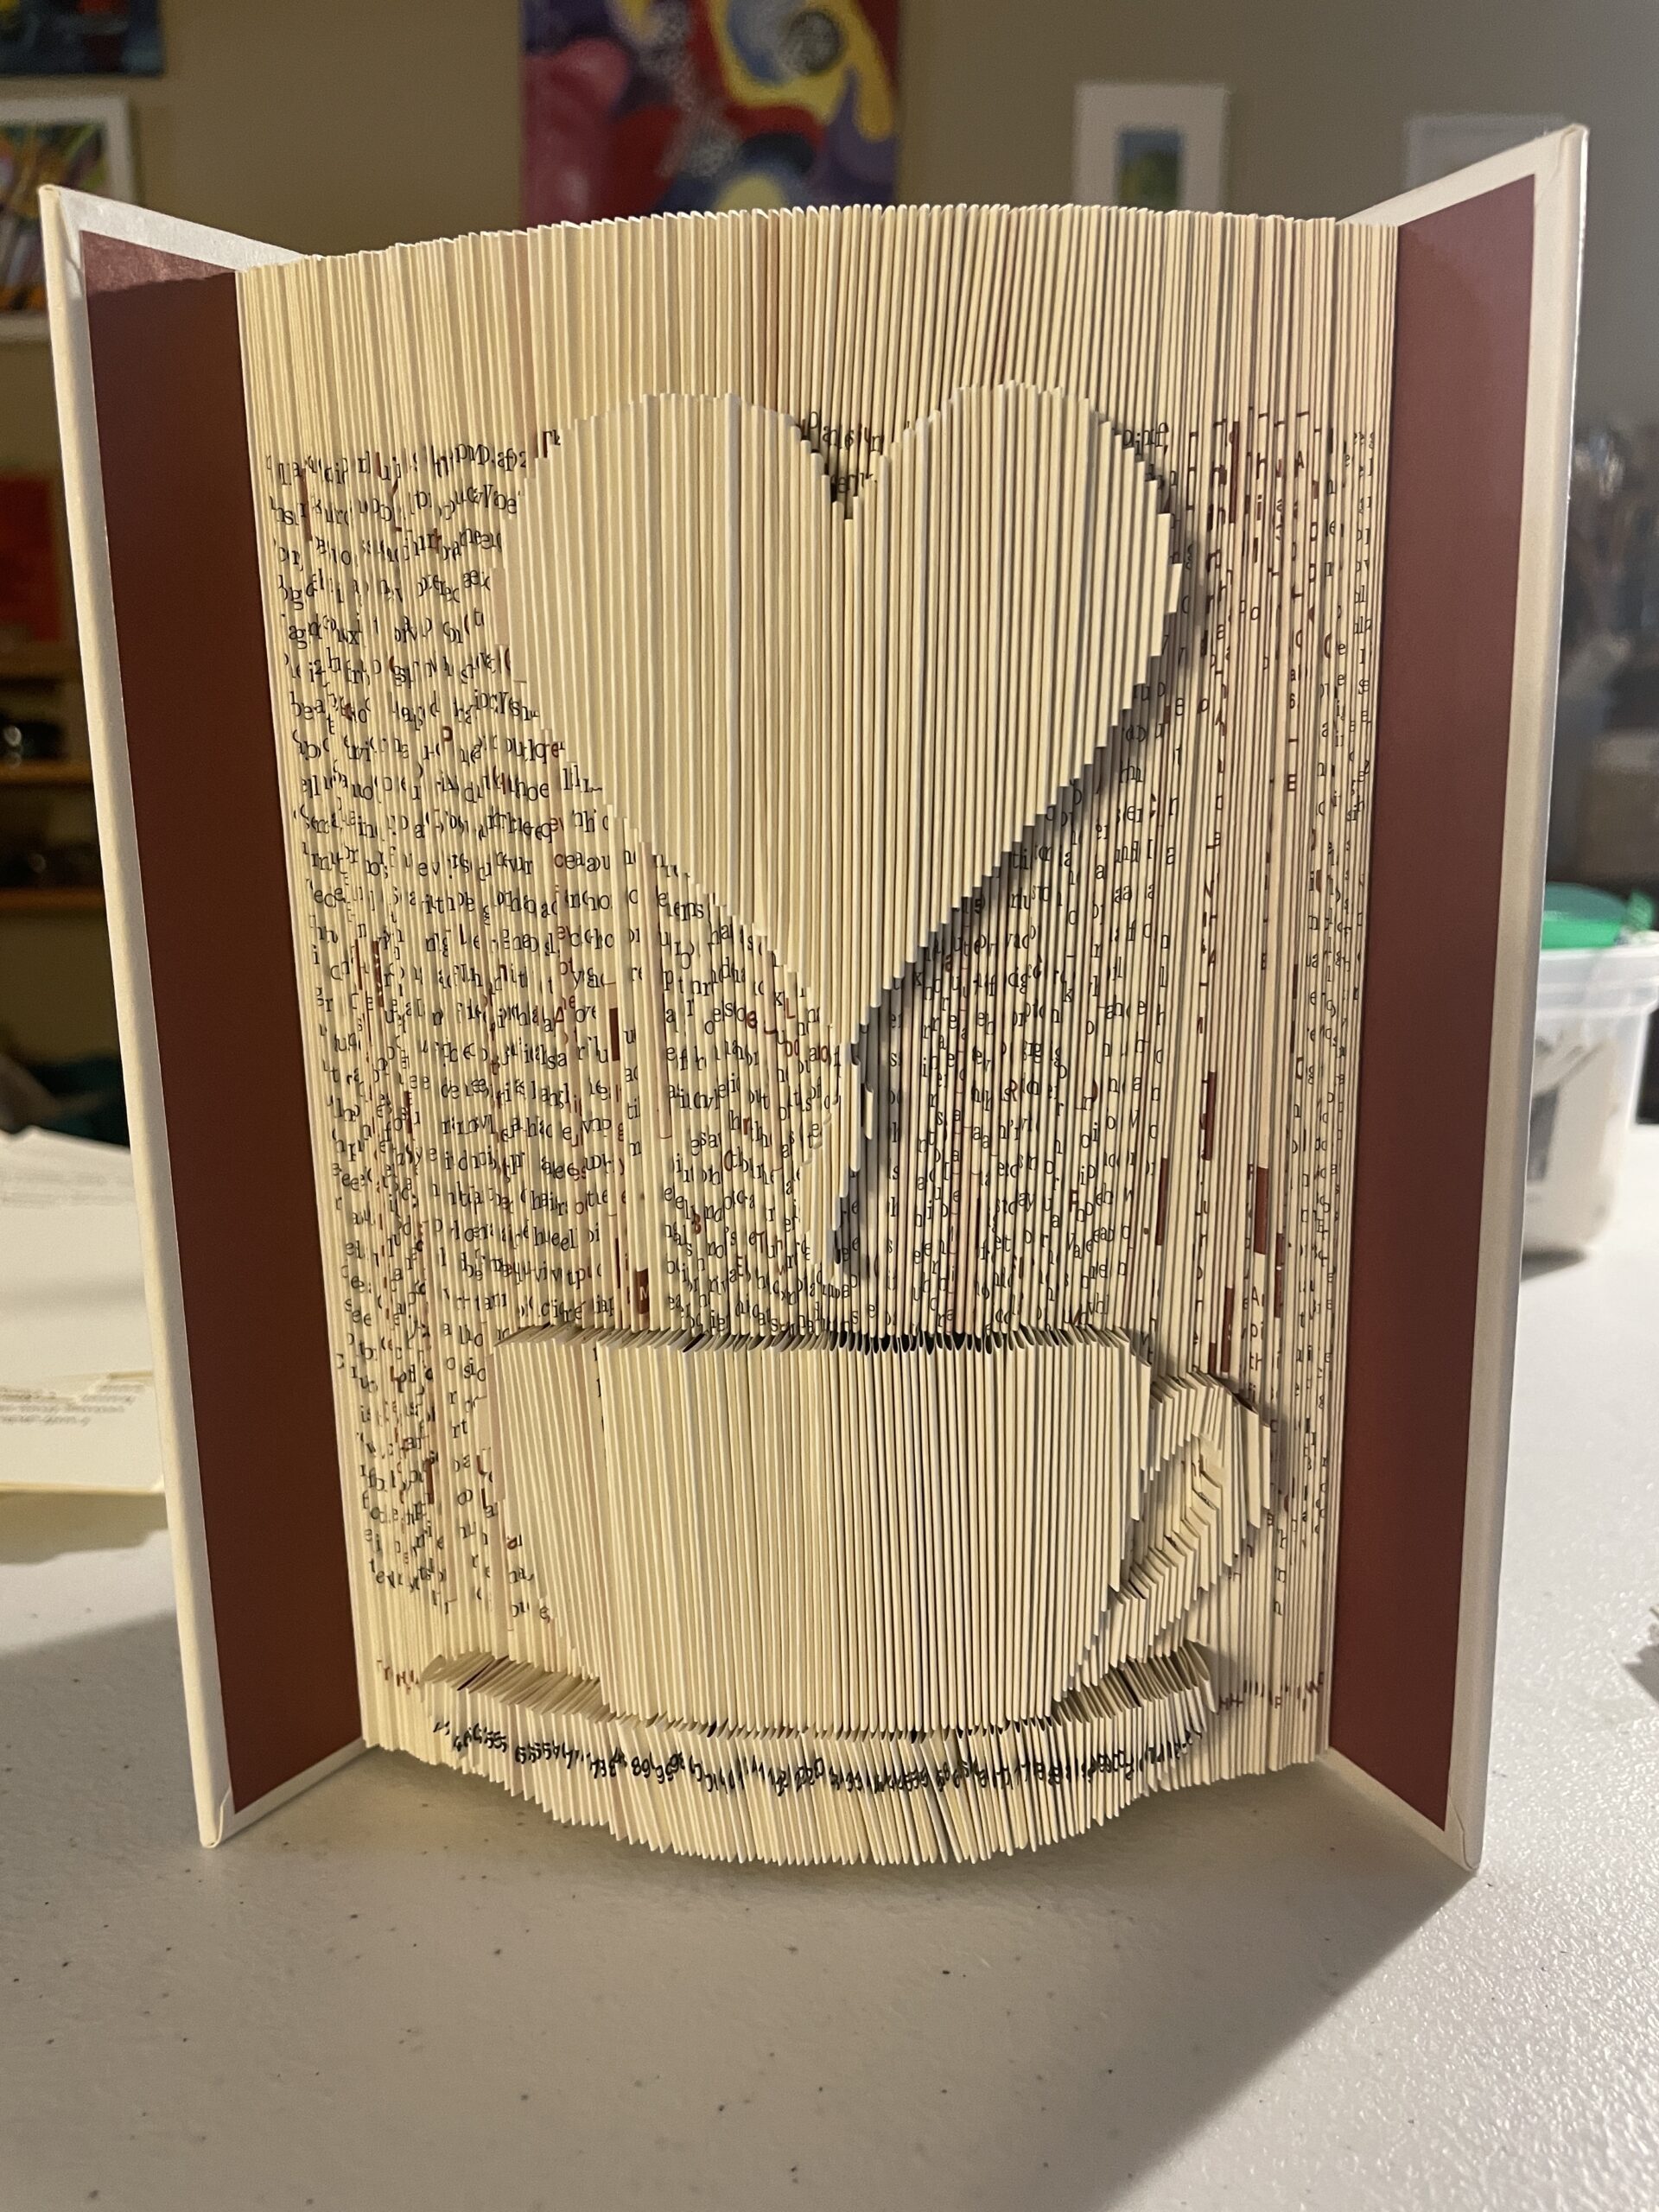 A book sculpture by Maggie Kerrigan that shows a cup of coffee with heart-shaped steam